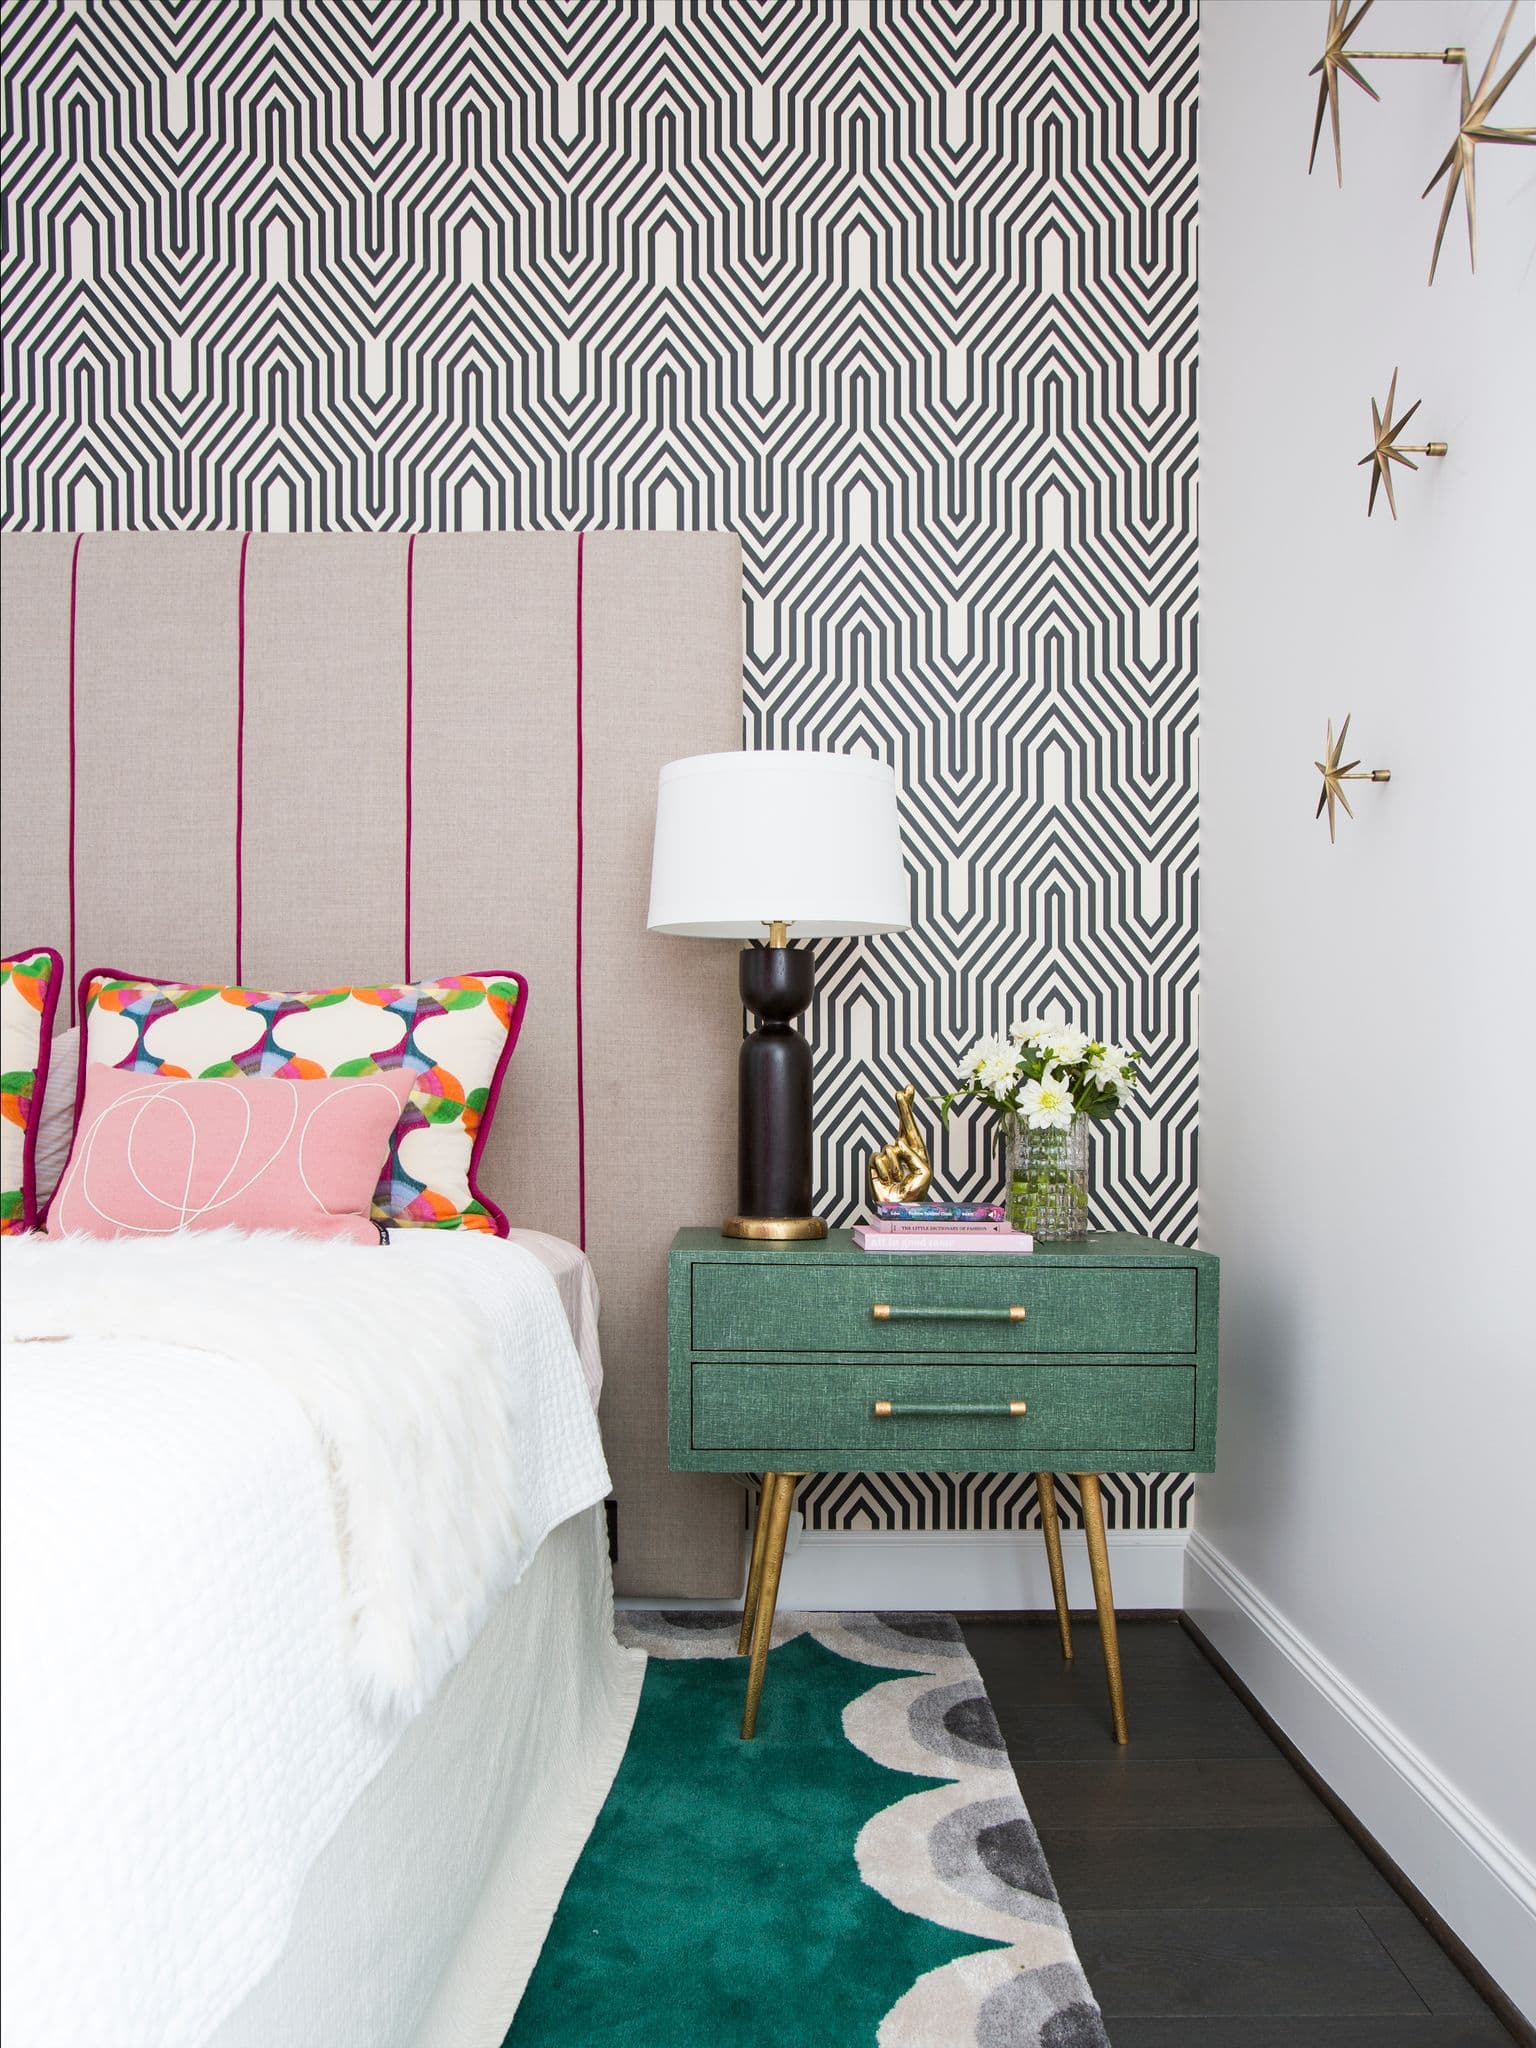 This bedroom designed by the Laura U Design Collective team